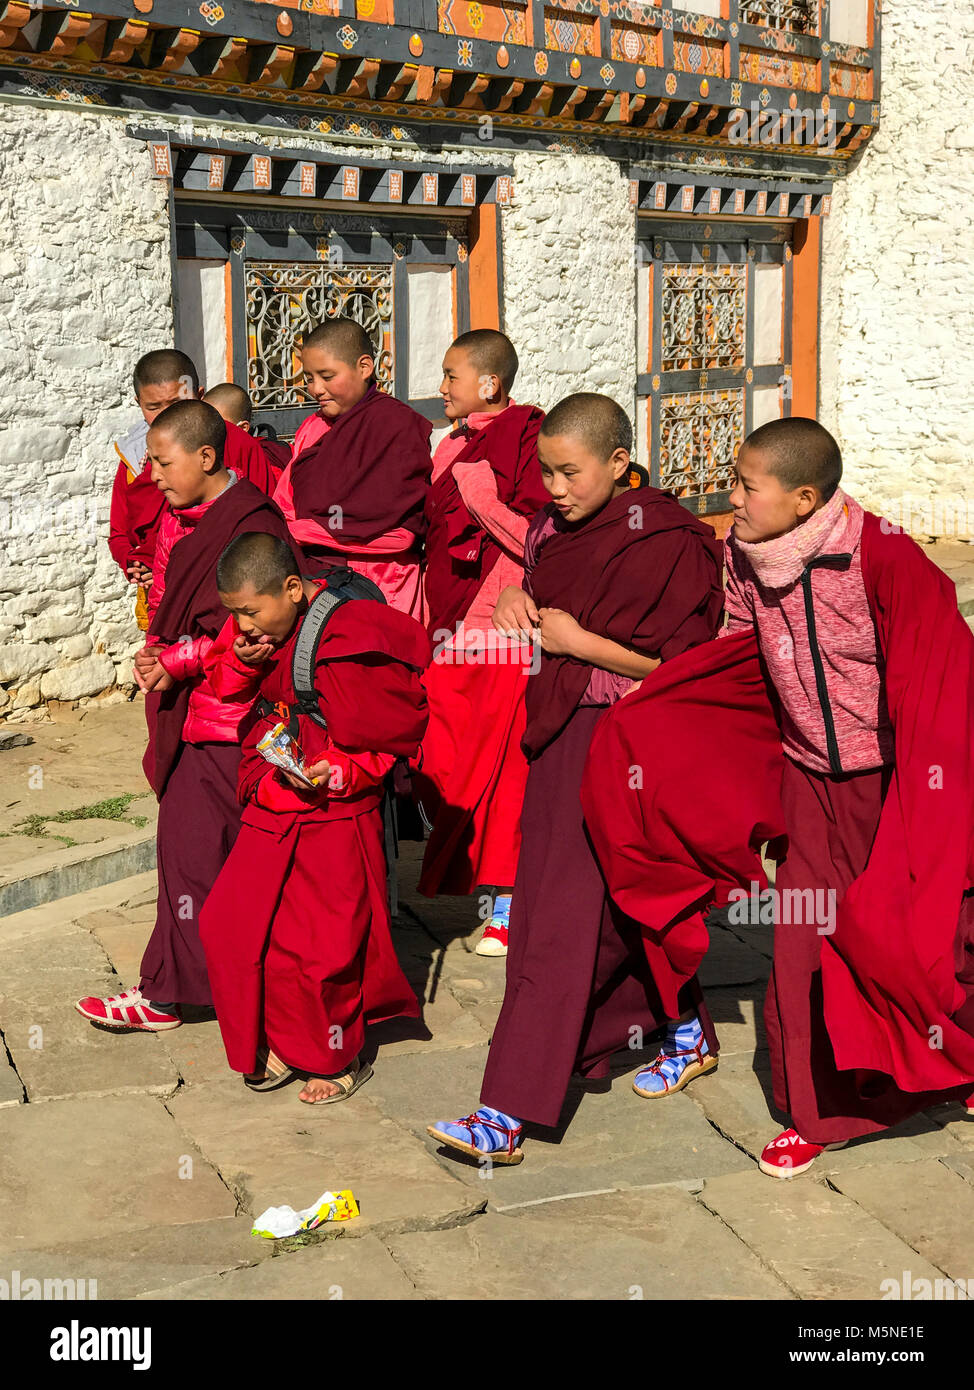 Bumthang, Bhutan. Young Buddhist Monks (Acolytes) at  a Religious Festival at  Jambay Lhakhang (Monastery/Temple). Stock Photo